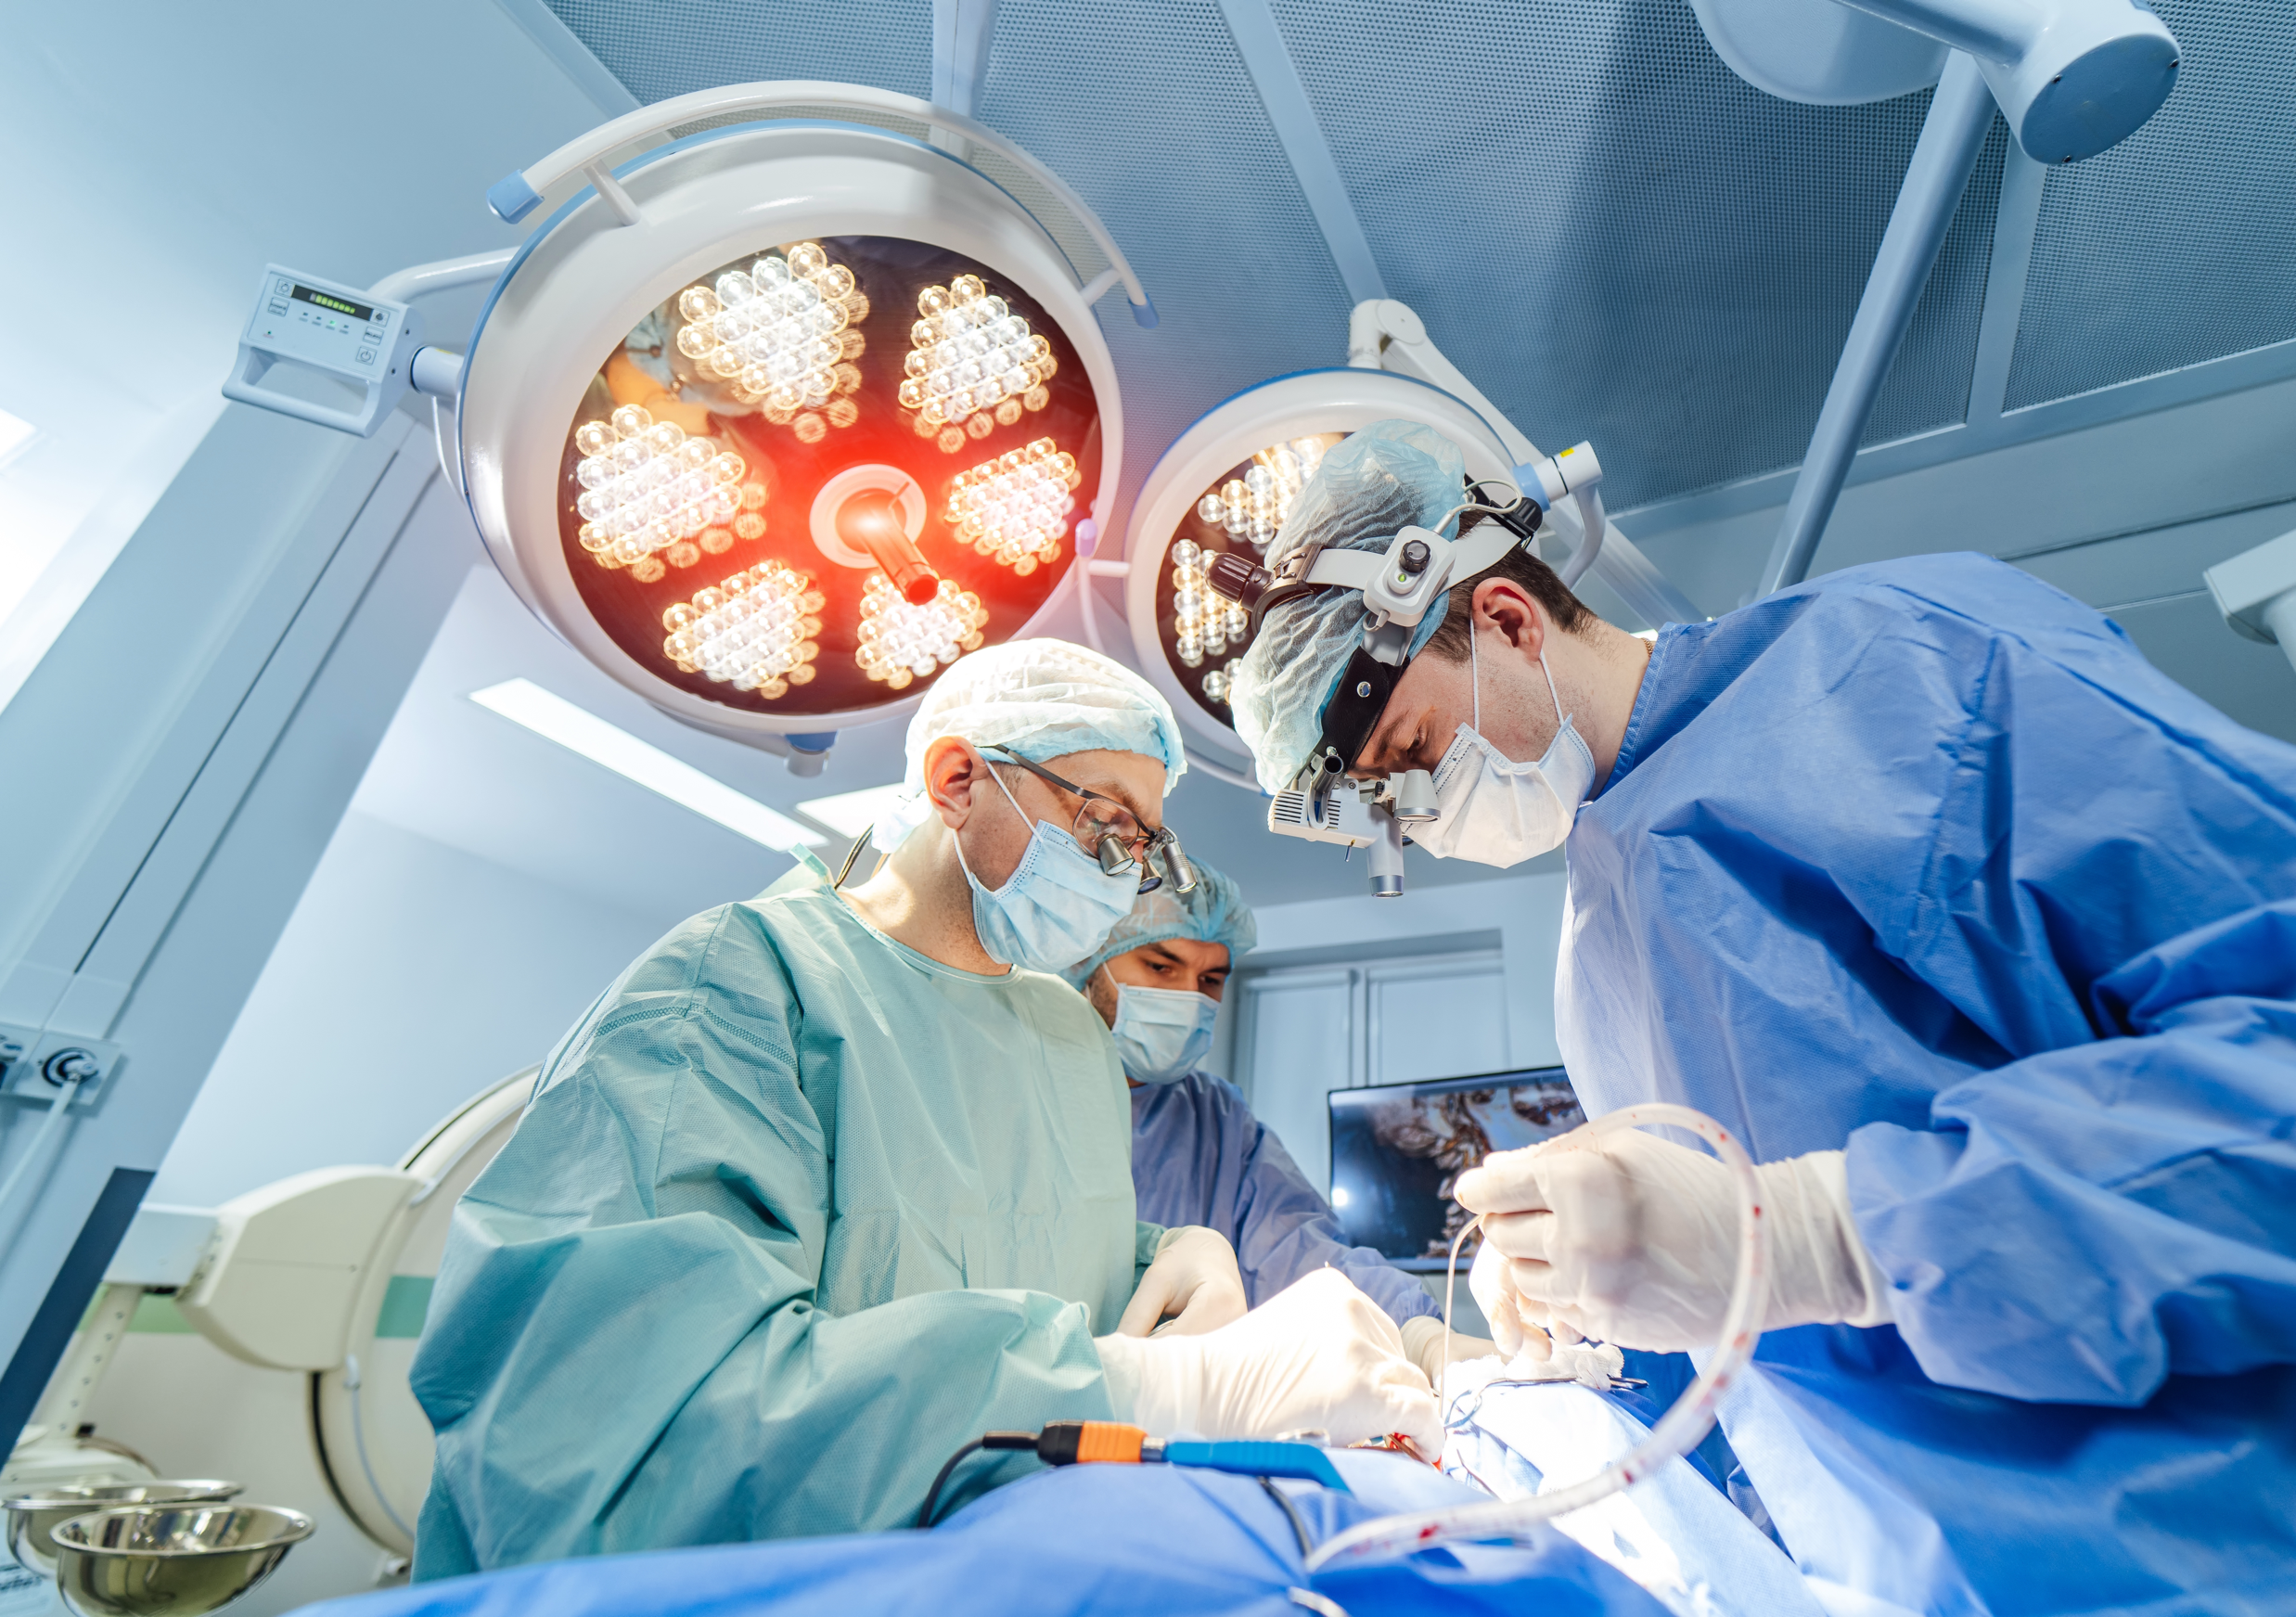 Carotid Artery Surgery; Critical Procedure with High Survival Rates